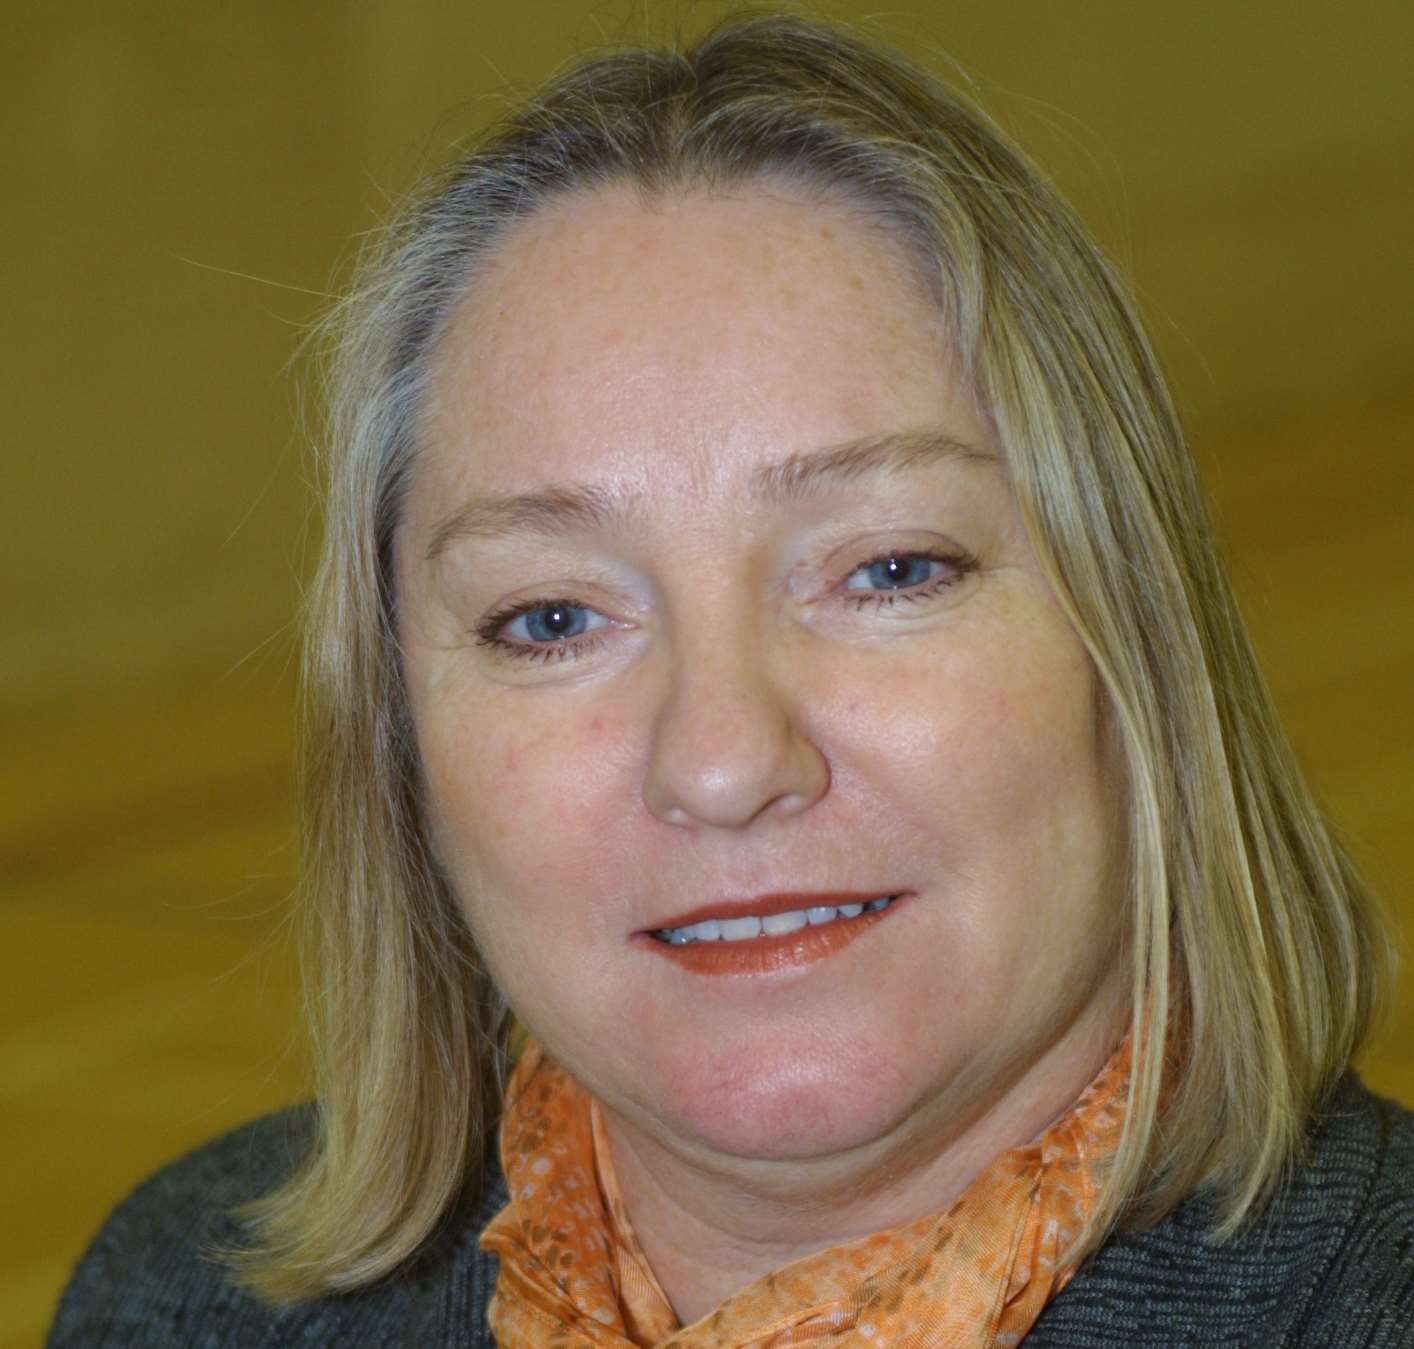 Cllr Jane Cribbon has died from a terminal illness